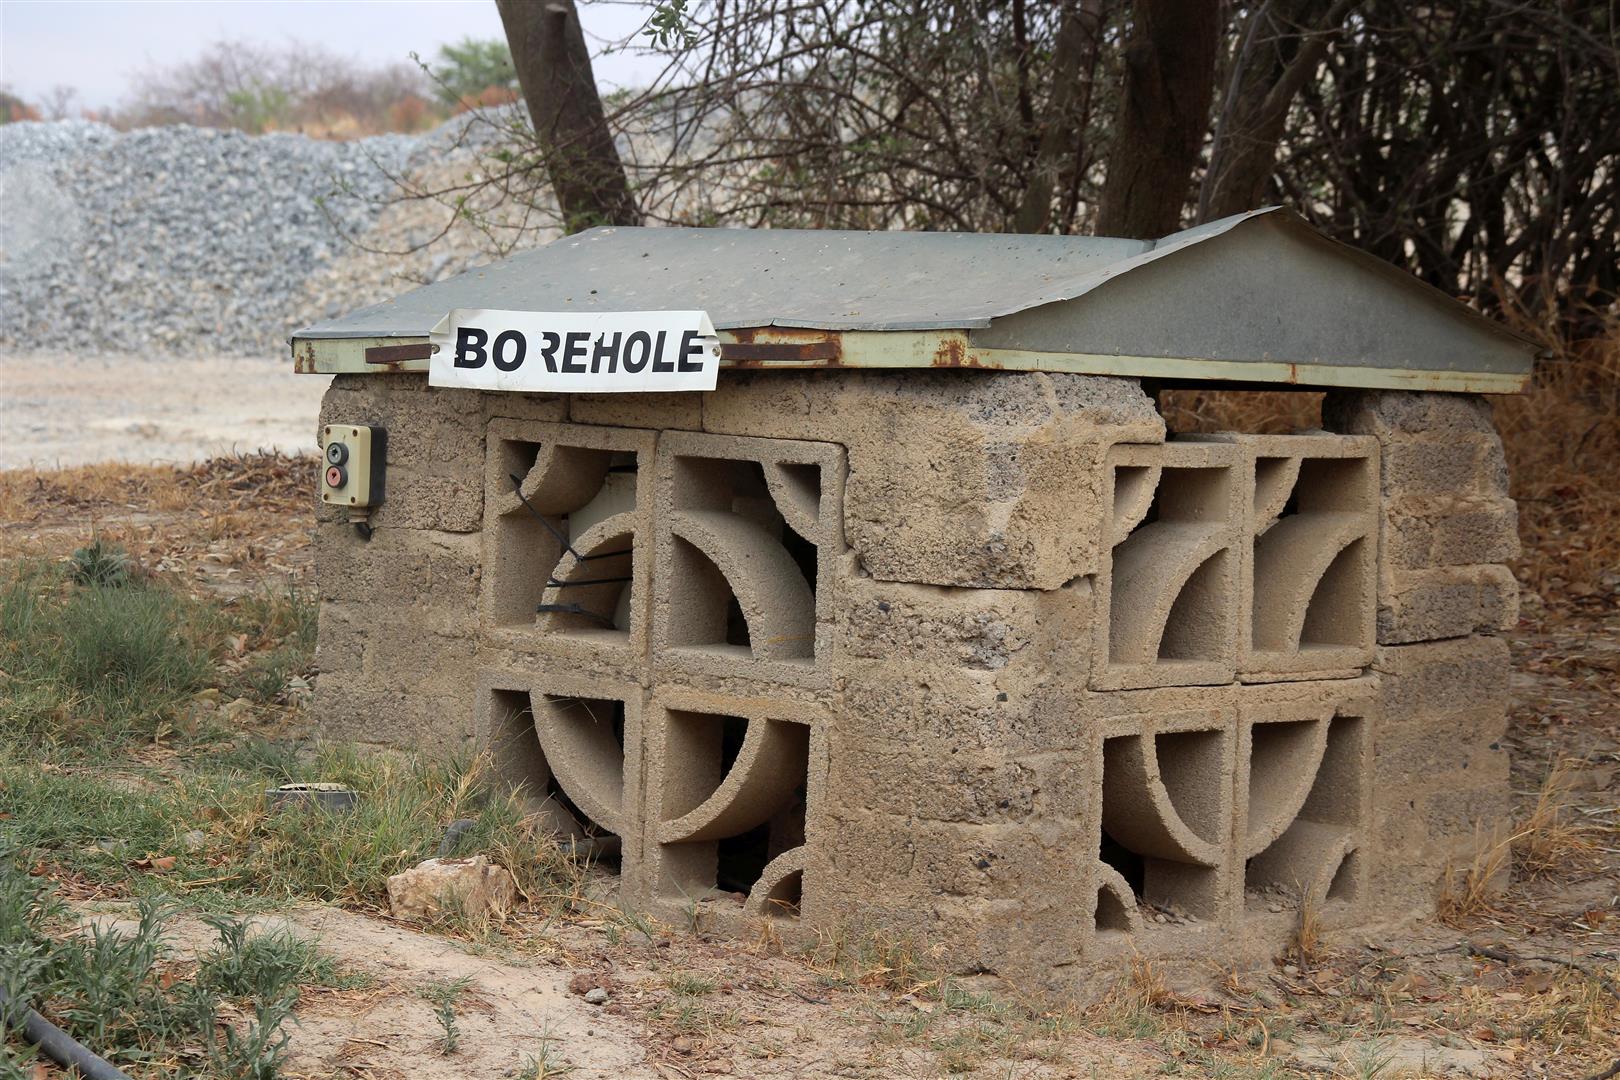 The more management questions and information about existing boreholes the project team receives, the more beneficial the final monitoring network design will be to decision makers and landowners in the Central Karoo.